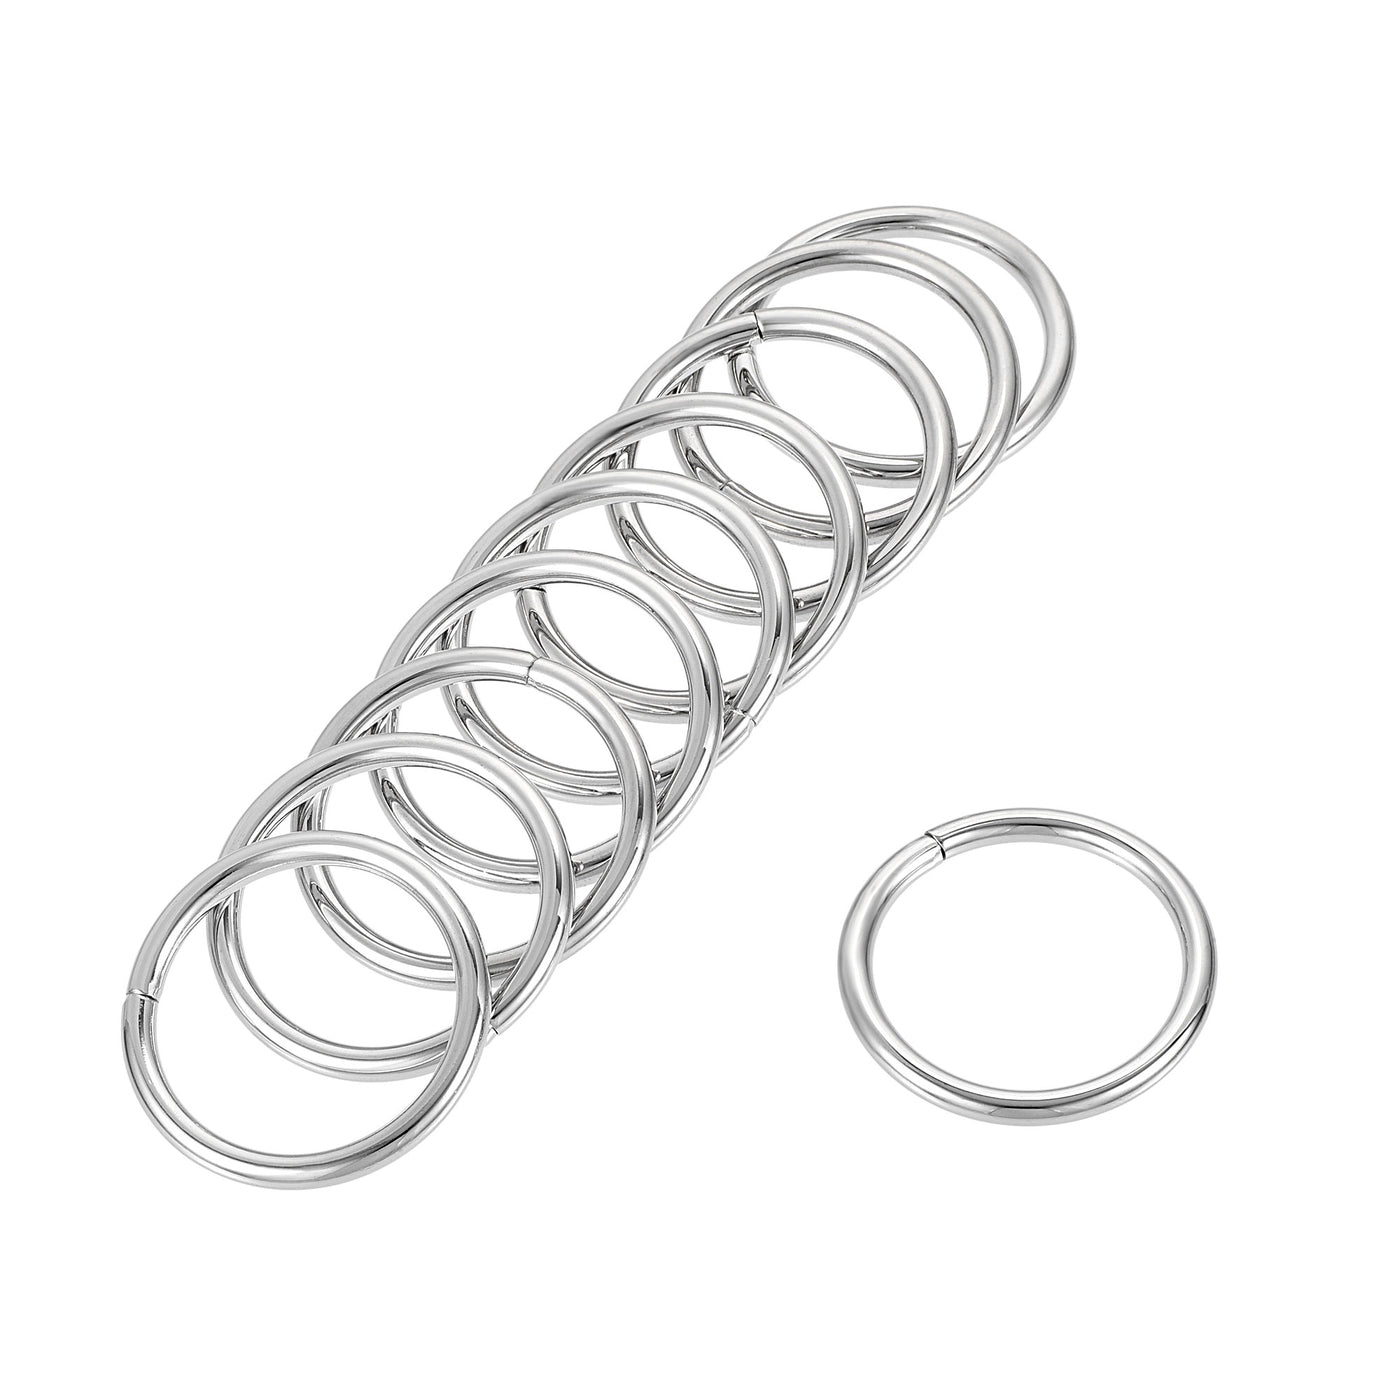 uxcell Uxcell Metal O Ring 32mm(1.26") ID 3.8mm Thickness Non-Welded Rings Silver Tone 20pcs